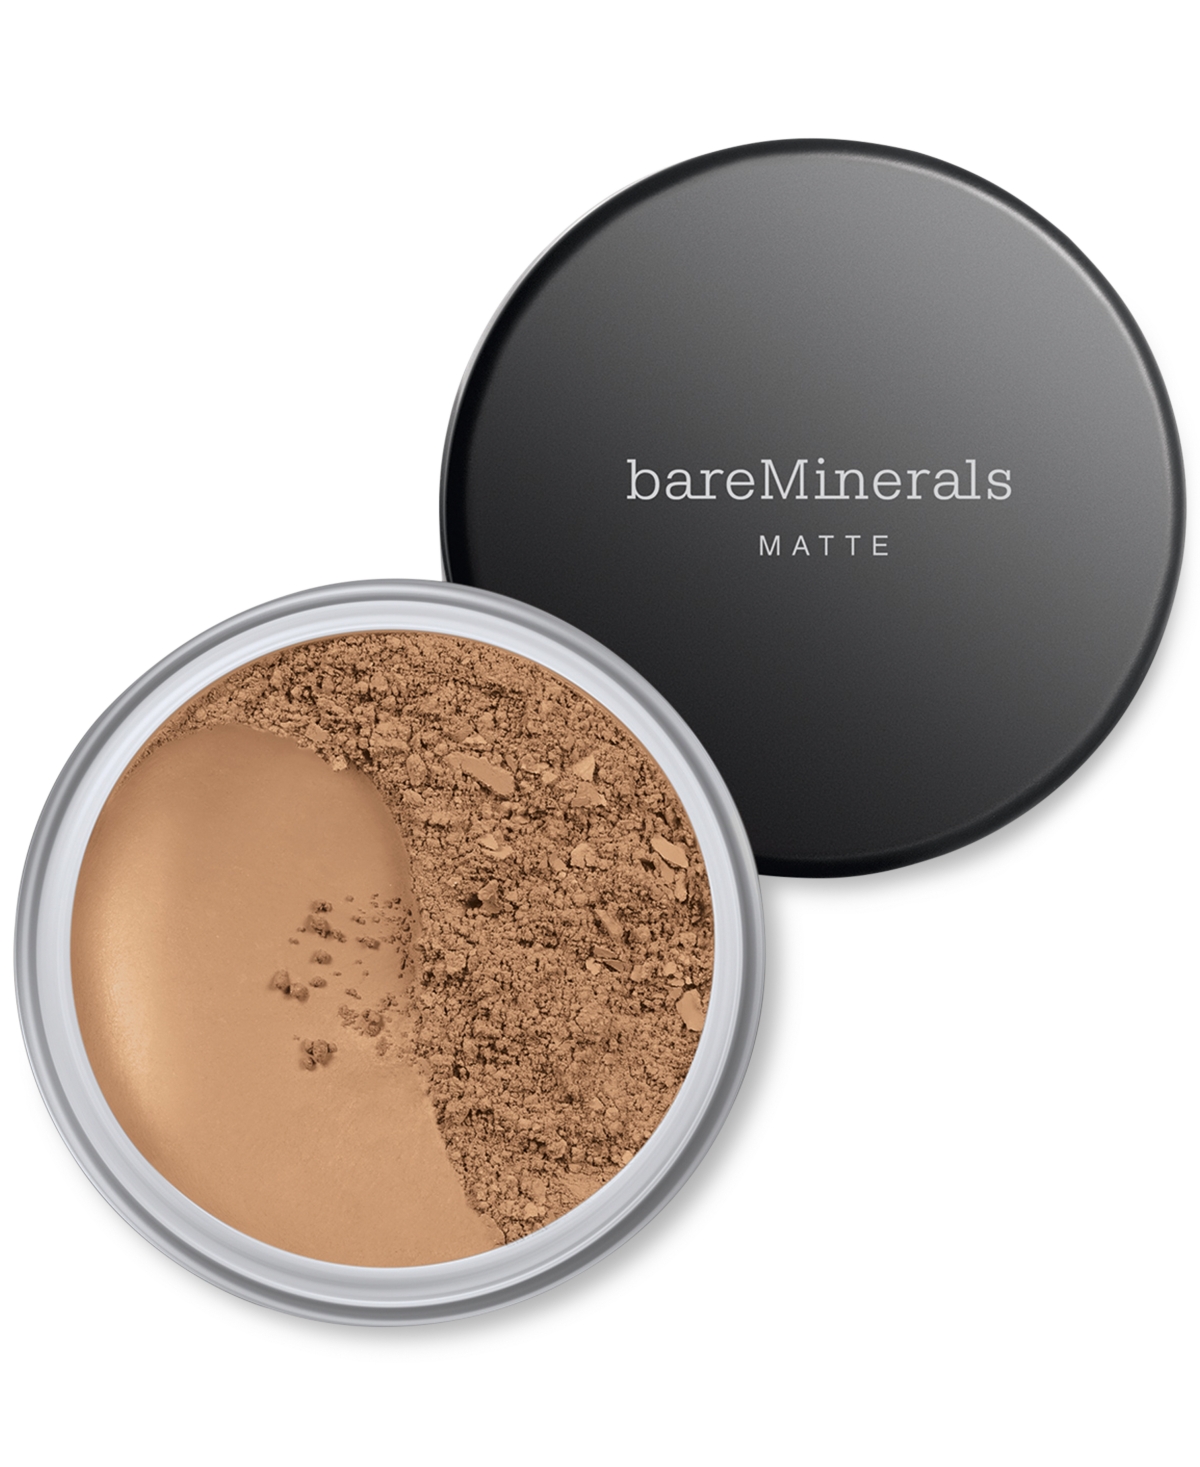 Bareminerals Matte Loose Powder Foundation Spf 15 In Tan  - For Tan Skin With Cool Undertones